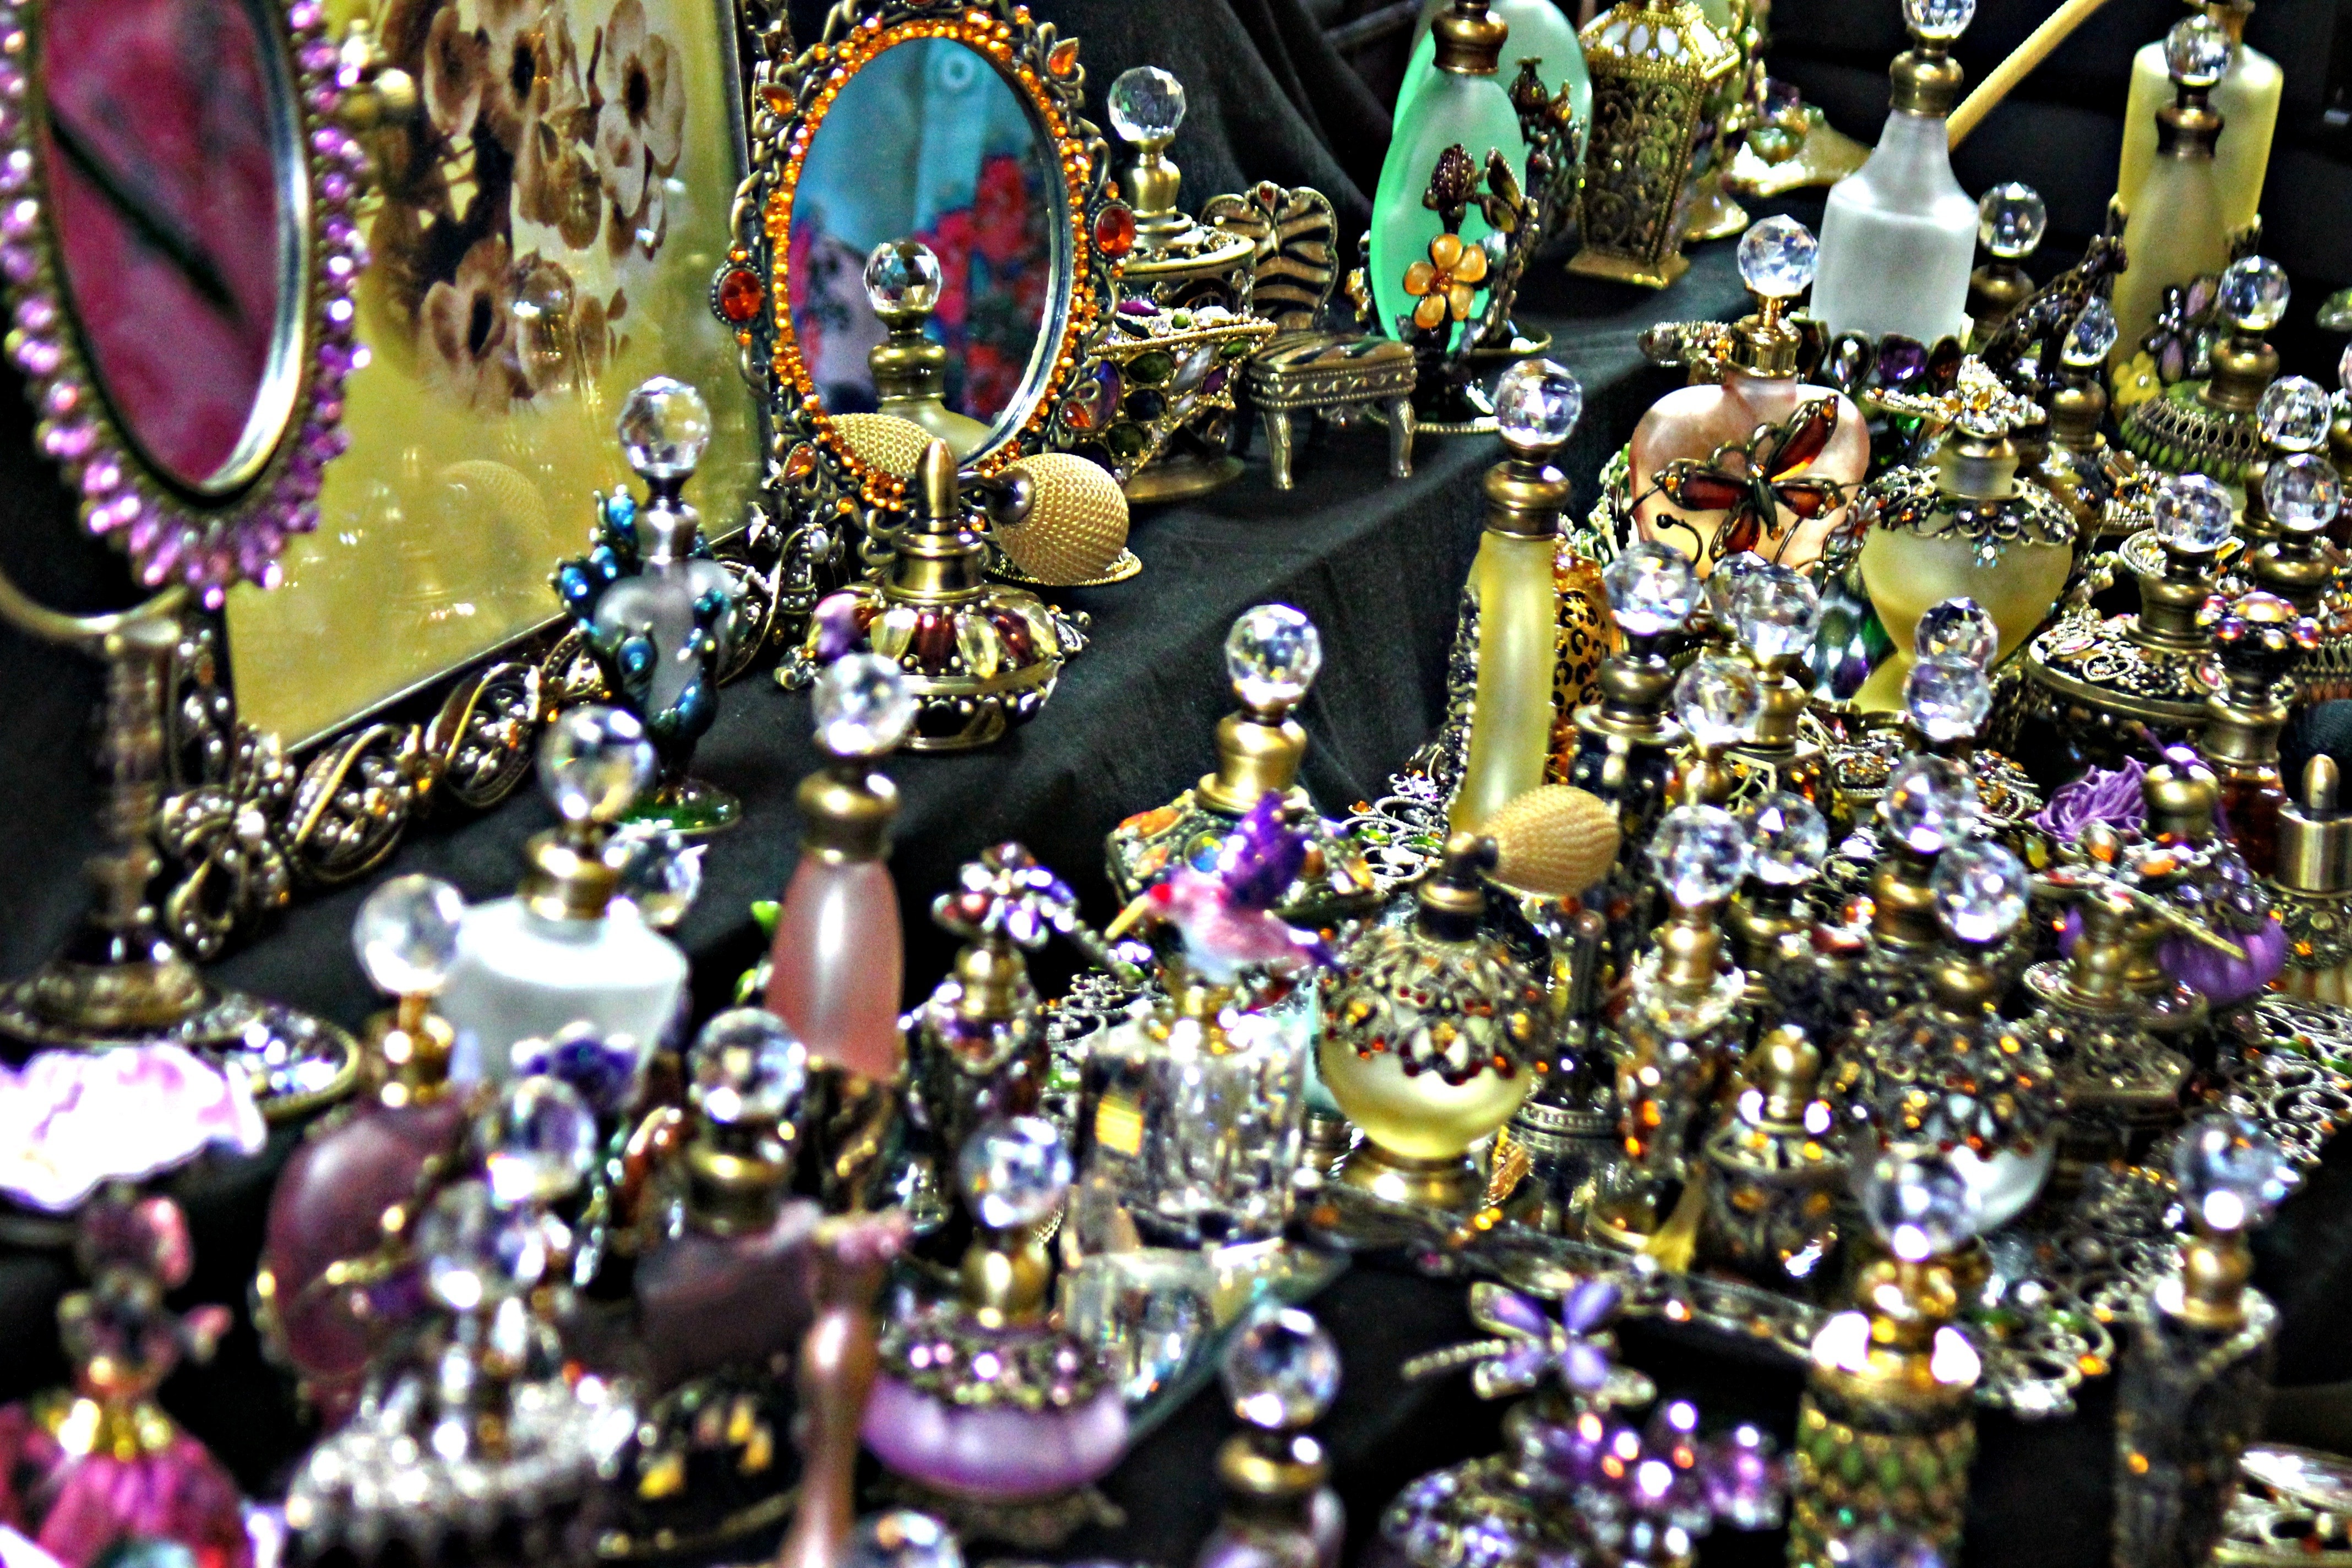 Glass, Colorful, Perfume Bottles, jewelry, large group of objects